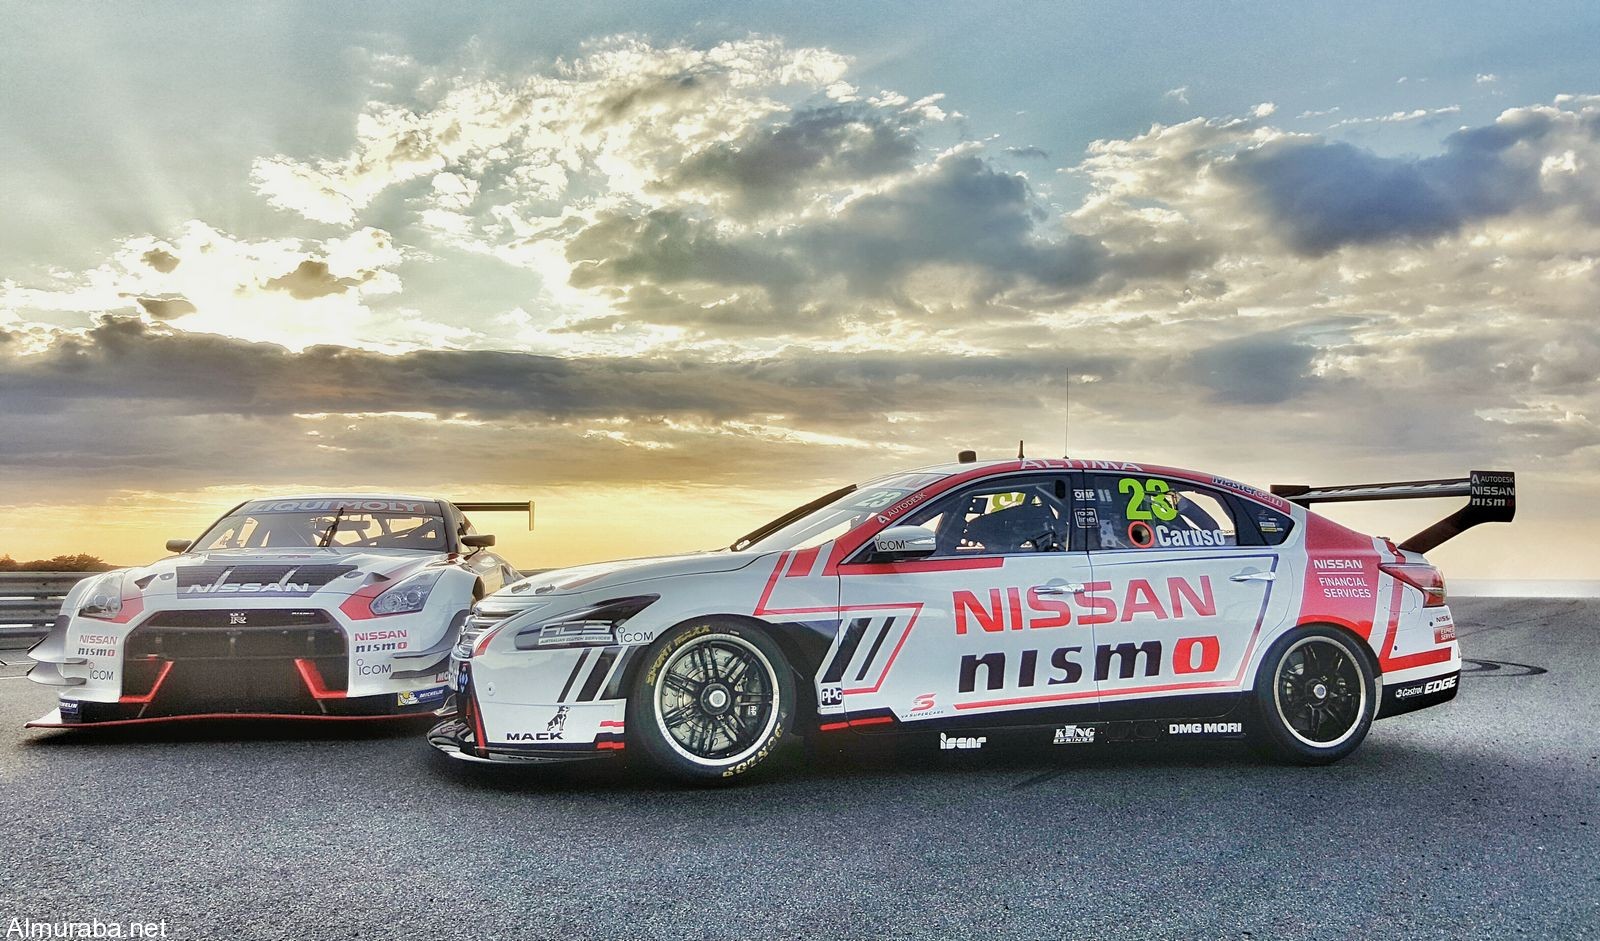 PHILLIP ISLAND, Australia (Jan. 28, 2016) – Nissan has unveiled its 2016 Australian motorsport activities at the Phillip Island Grand Prix Circuit in Victoria today. The 2016 livery for Michael Caruso’s #23 NISMO Nissan Altima V8 Supercar was revealed, carrying a variation of the global GT3 colors that the Altima carried in 2015. Also on track was the #1 Nissan GT-R NISMO GT3 that will aim to take back-to-back Bathurst 12 Hour victories for Nissan next week, with an Australian flag added to the now-familiar livery.